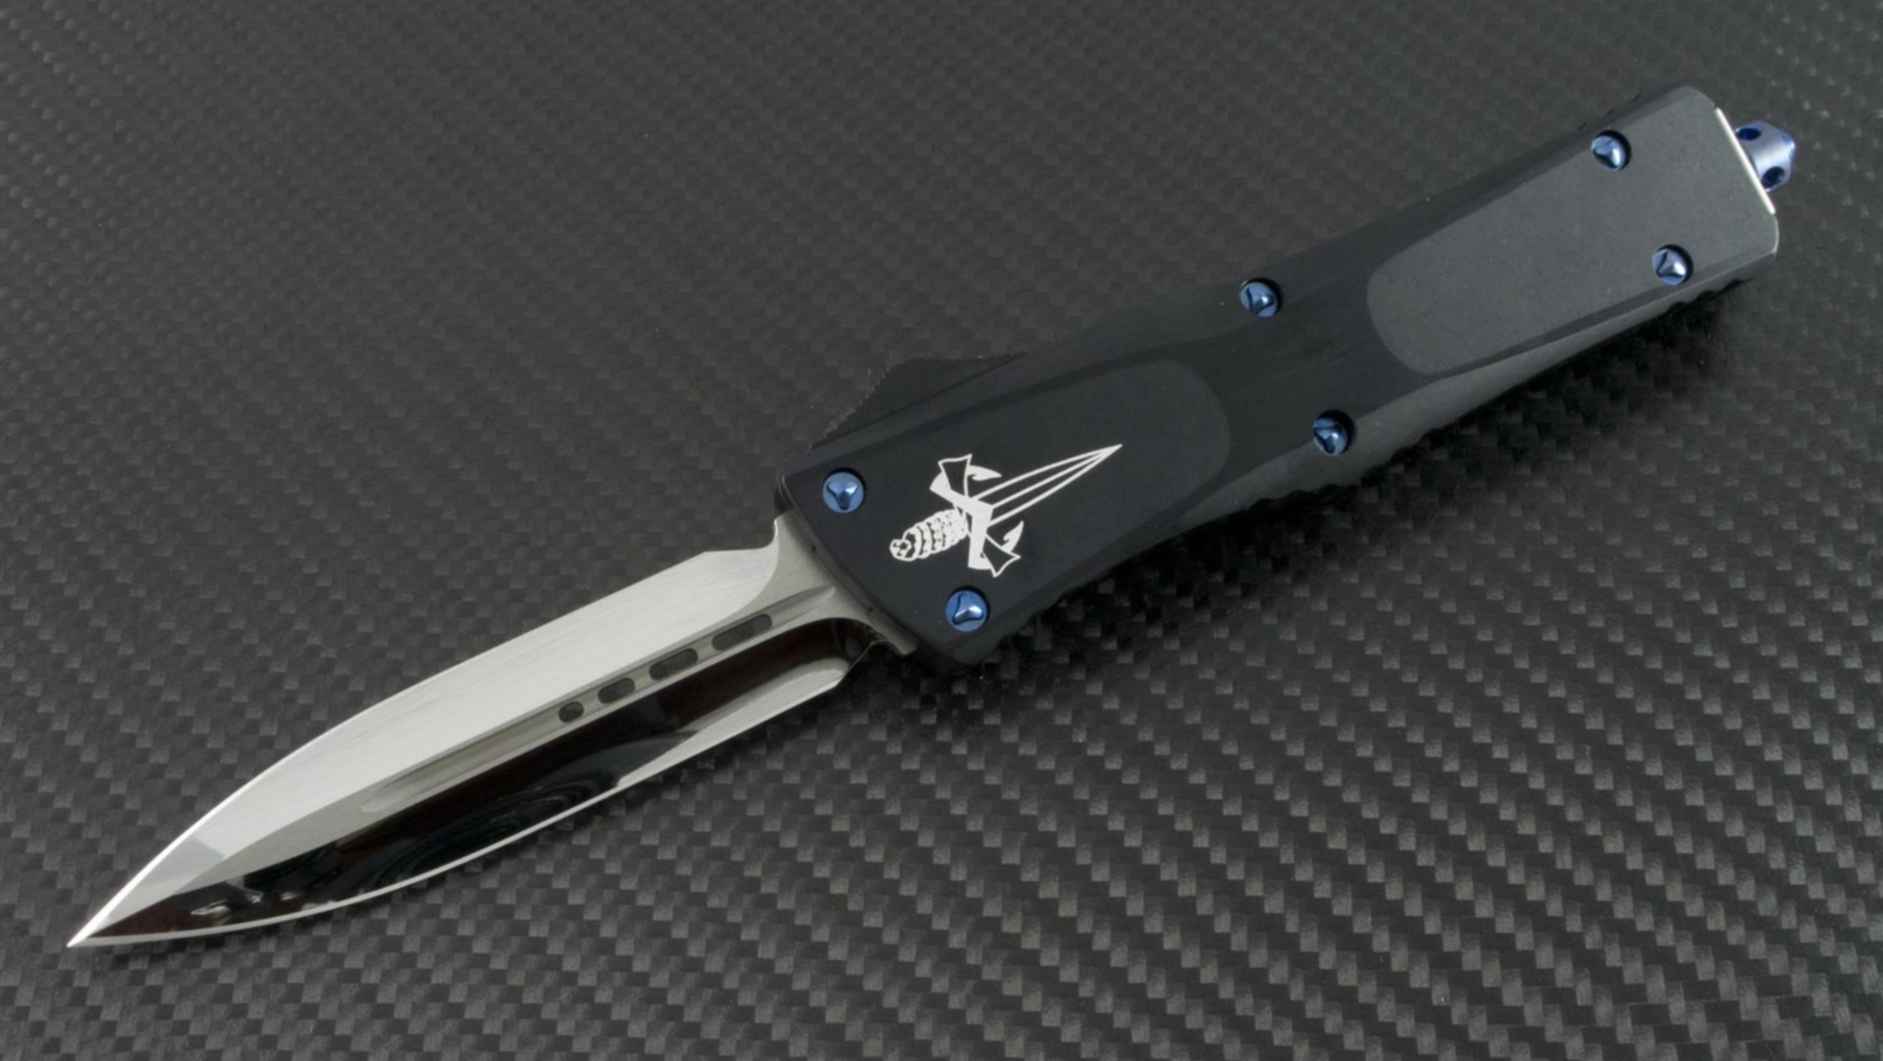 Microtech combat. Microtech Combat Troodon. Microtech Combat Troodon карбон. Нож Microtech Combat Troodon автоматический (BH-kk10). Microtech Combat Troodon 219-10bh Bounty Hunter Hellhound.